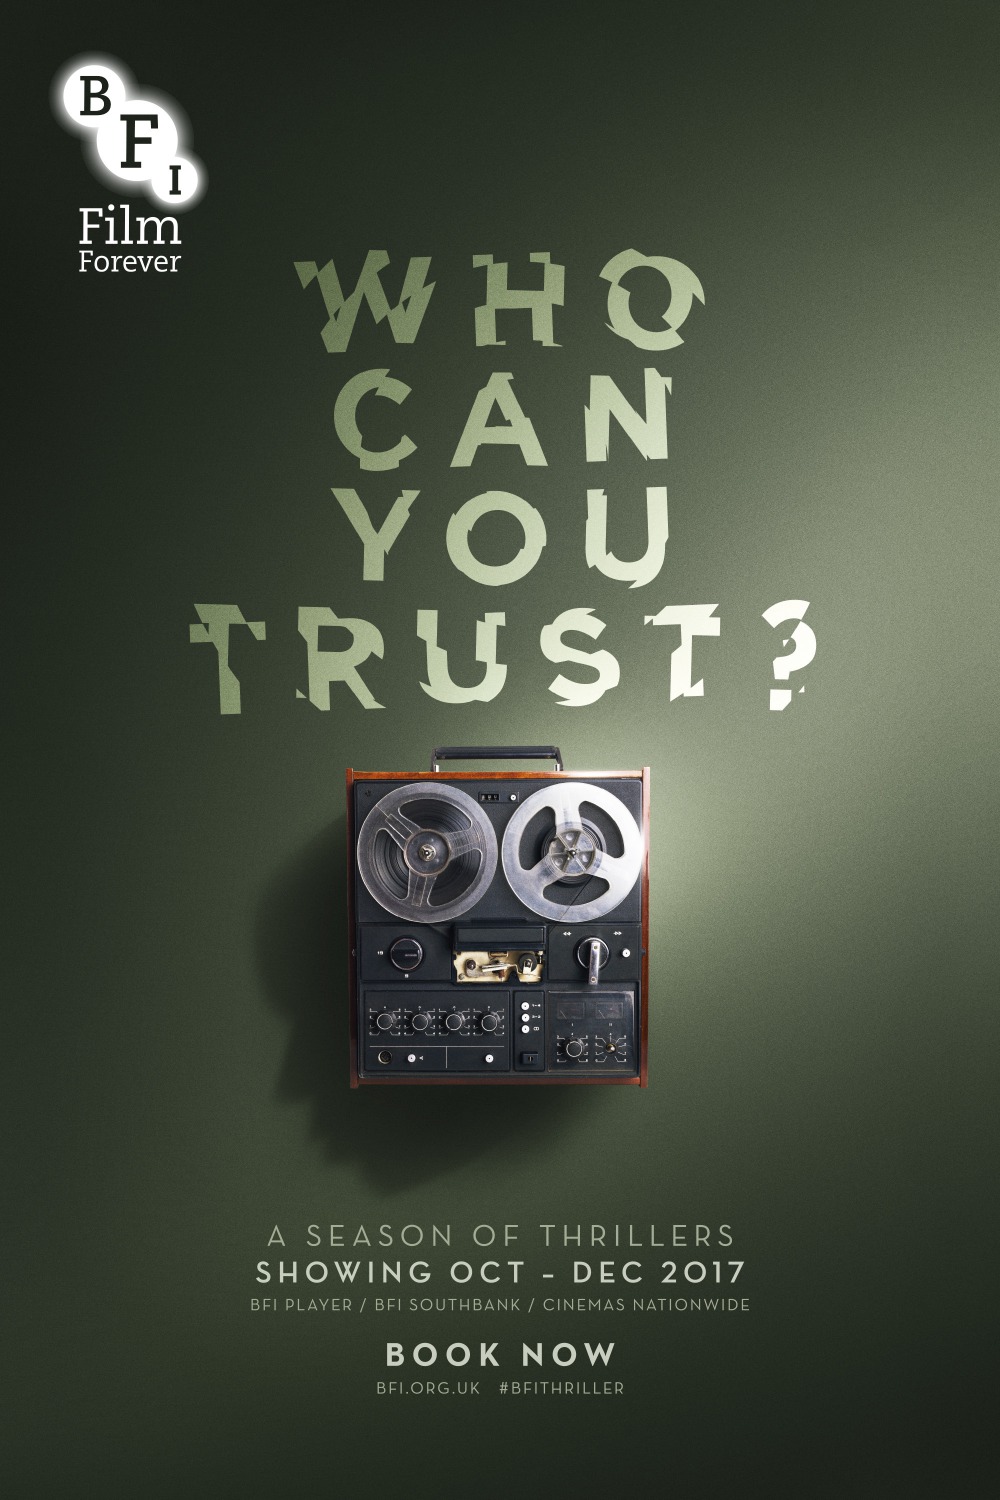 Extra Large TV Poster Image for BFI Film: A Season of Thrillers (#3 of 5)